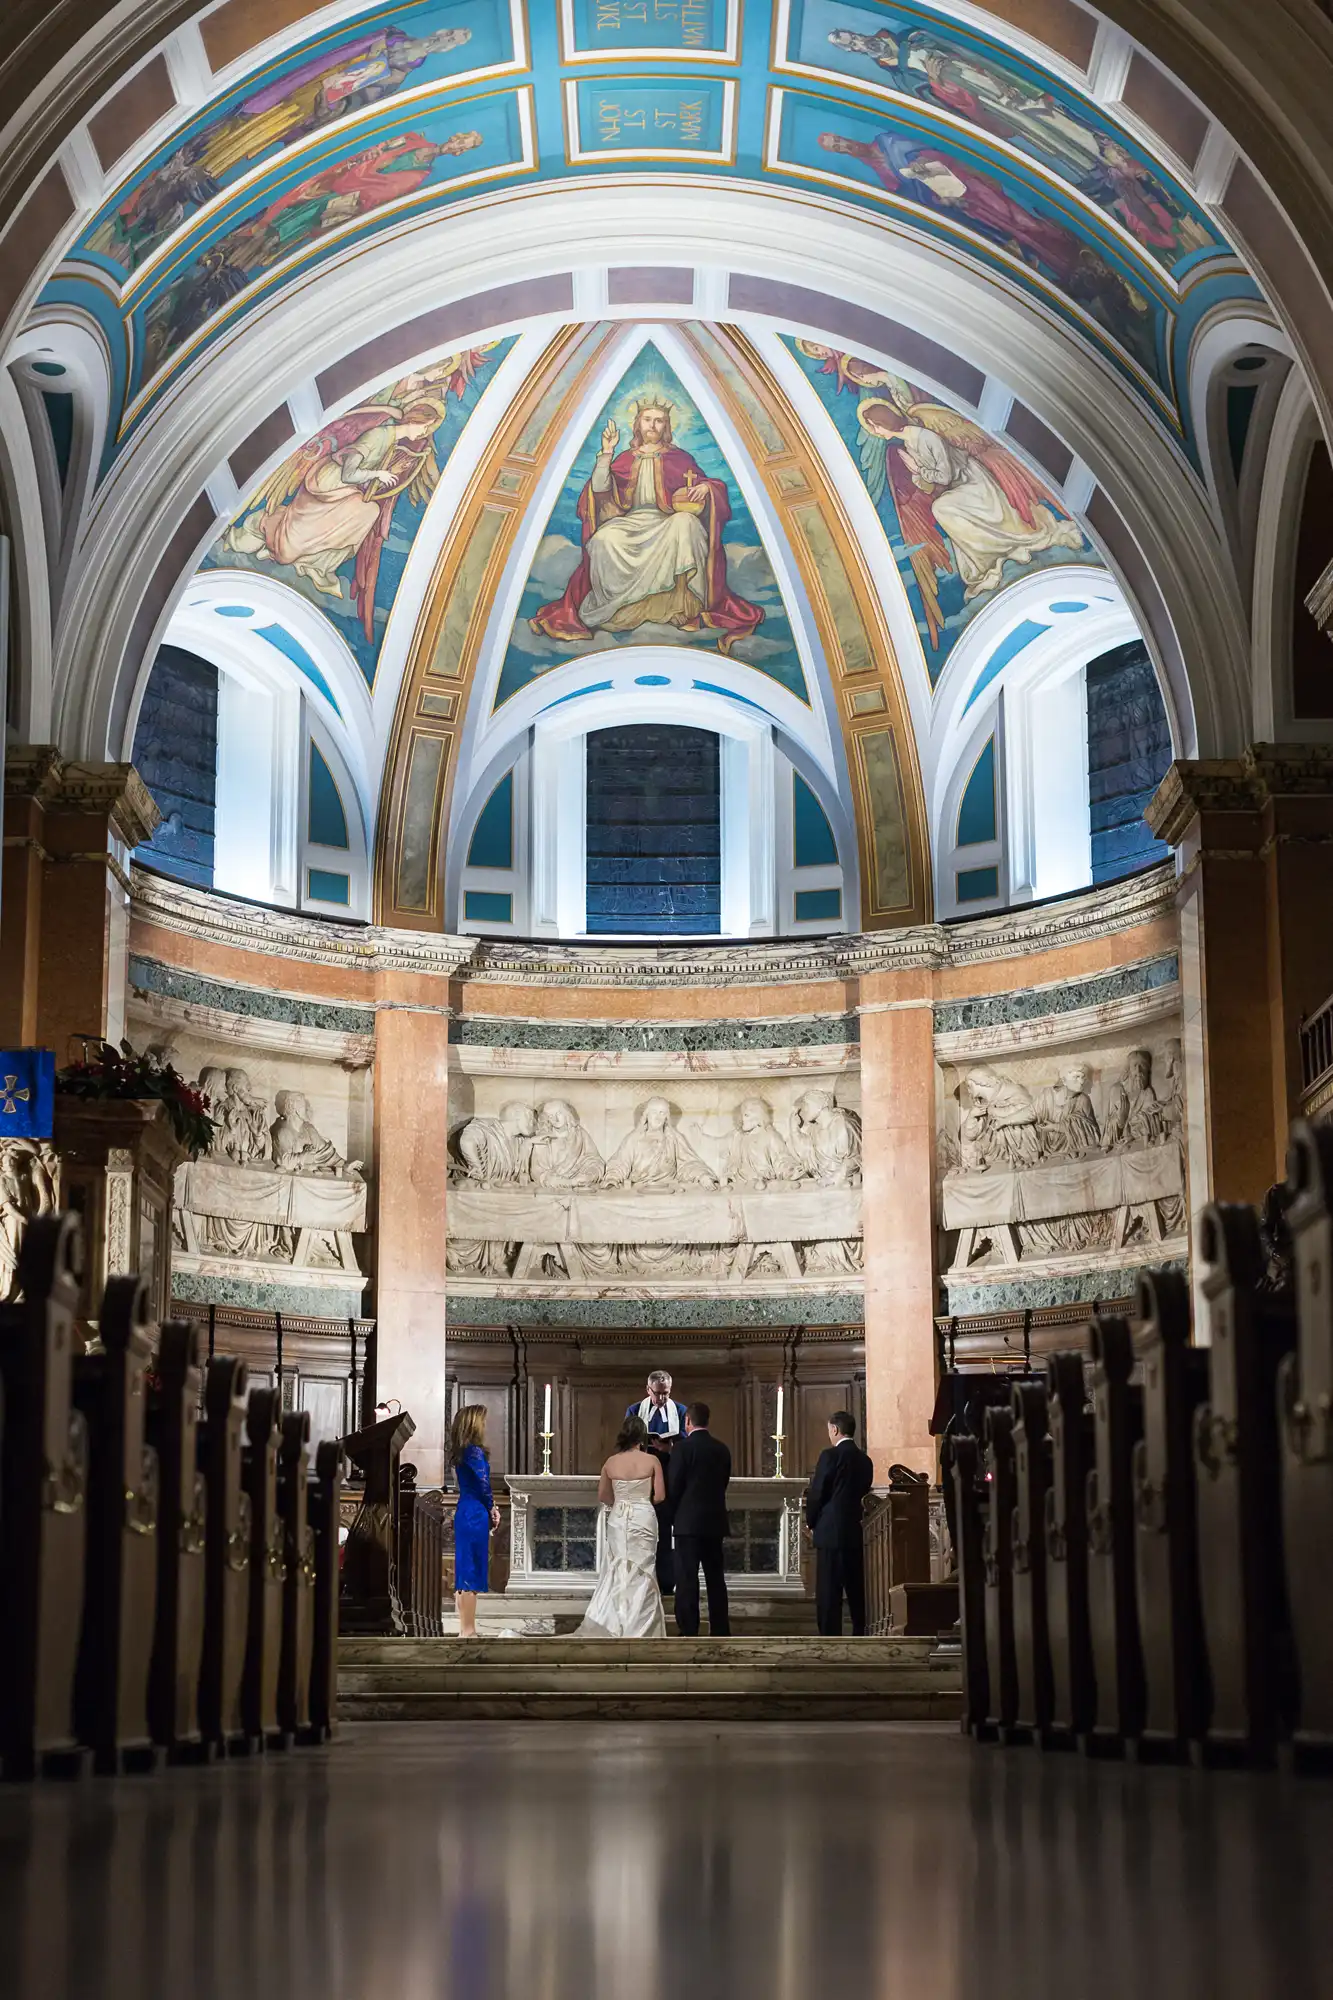 A bride and groom stand at the altar in a grand church with vibrant frescoes, flanked by marble columns, with guests in pews.